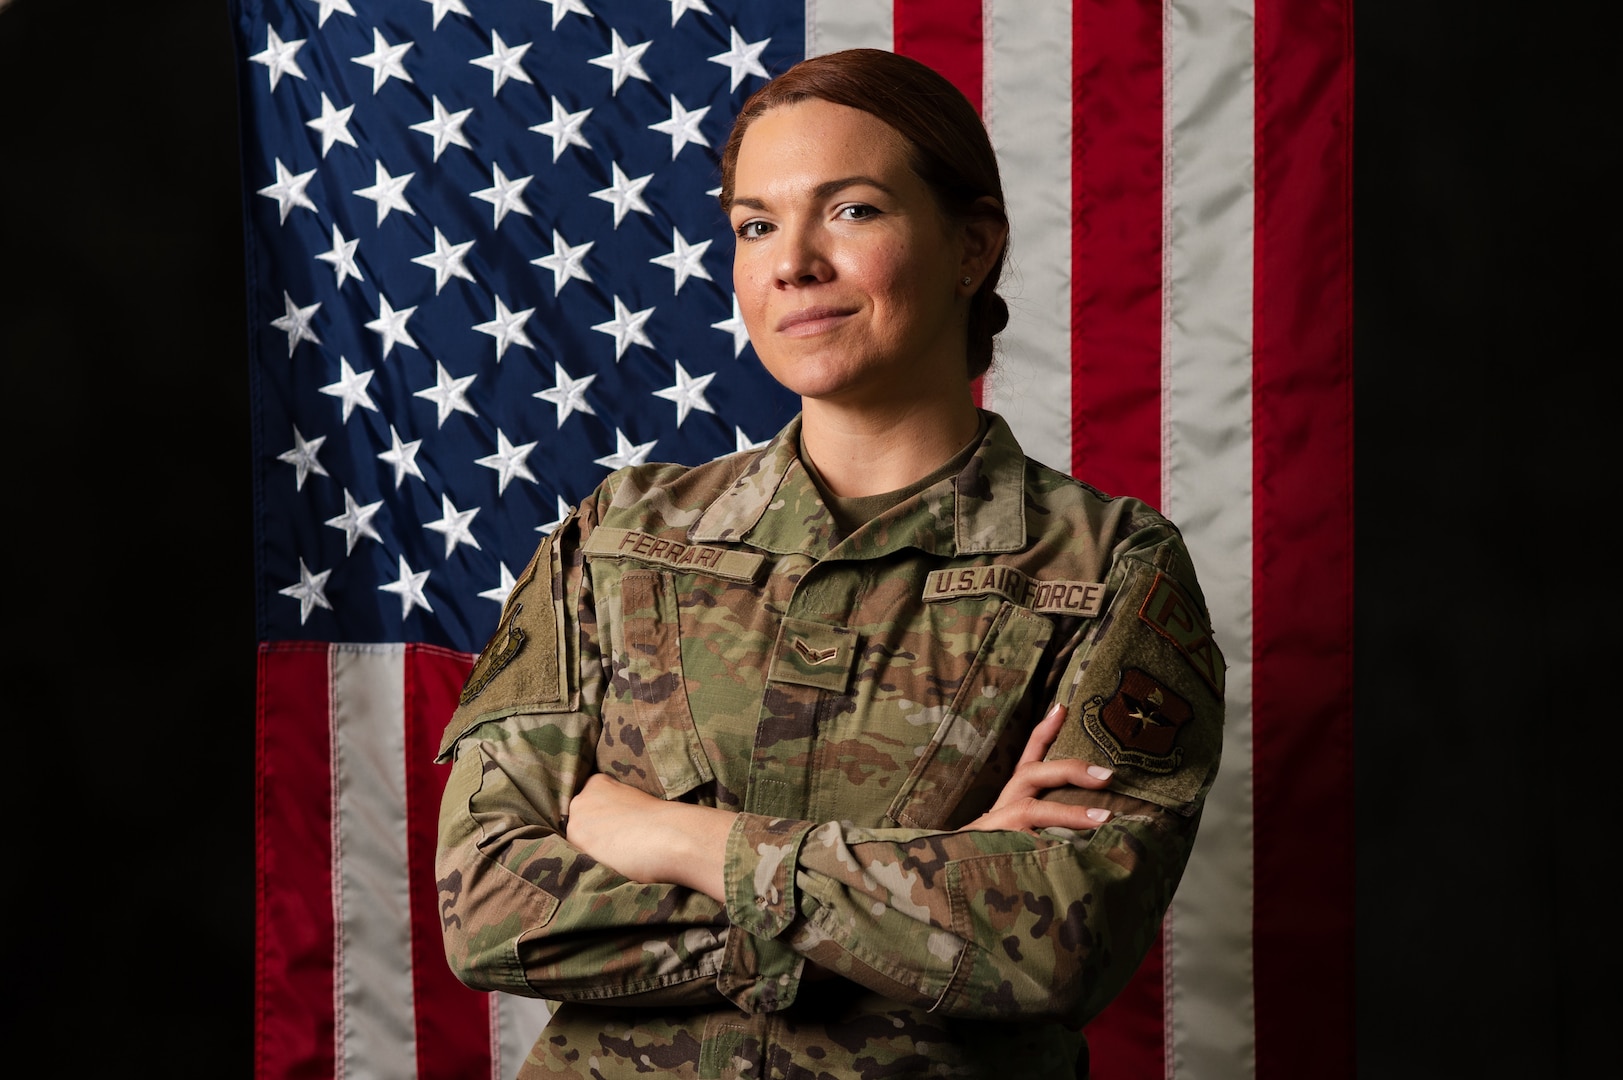 U.S. Air Force Airman 1st Class Michelle Ferrari, 49th Wing Public Affairs journeyman, poses for a photo at Holloman Air Force Base, New Mexico, April 3, 2024. Ferrari shared her experiences that ultimately led to her joining the Air Force, exemplifying resiliency and the ability to overcome hardships and traumatic experiences. (U.S. Air Force photo by Senior Airman Antonio Salfran)